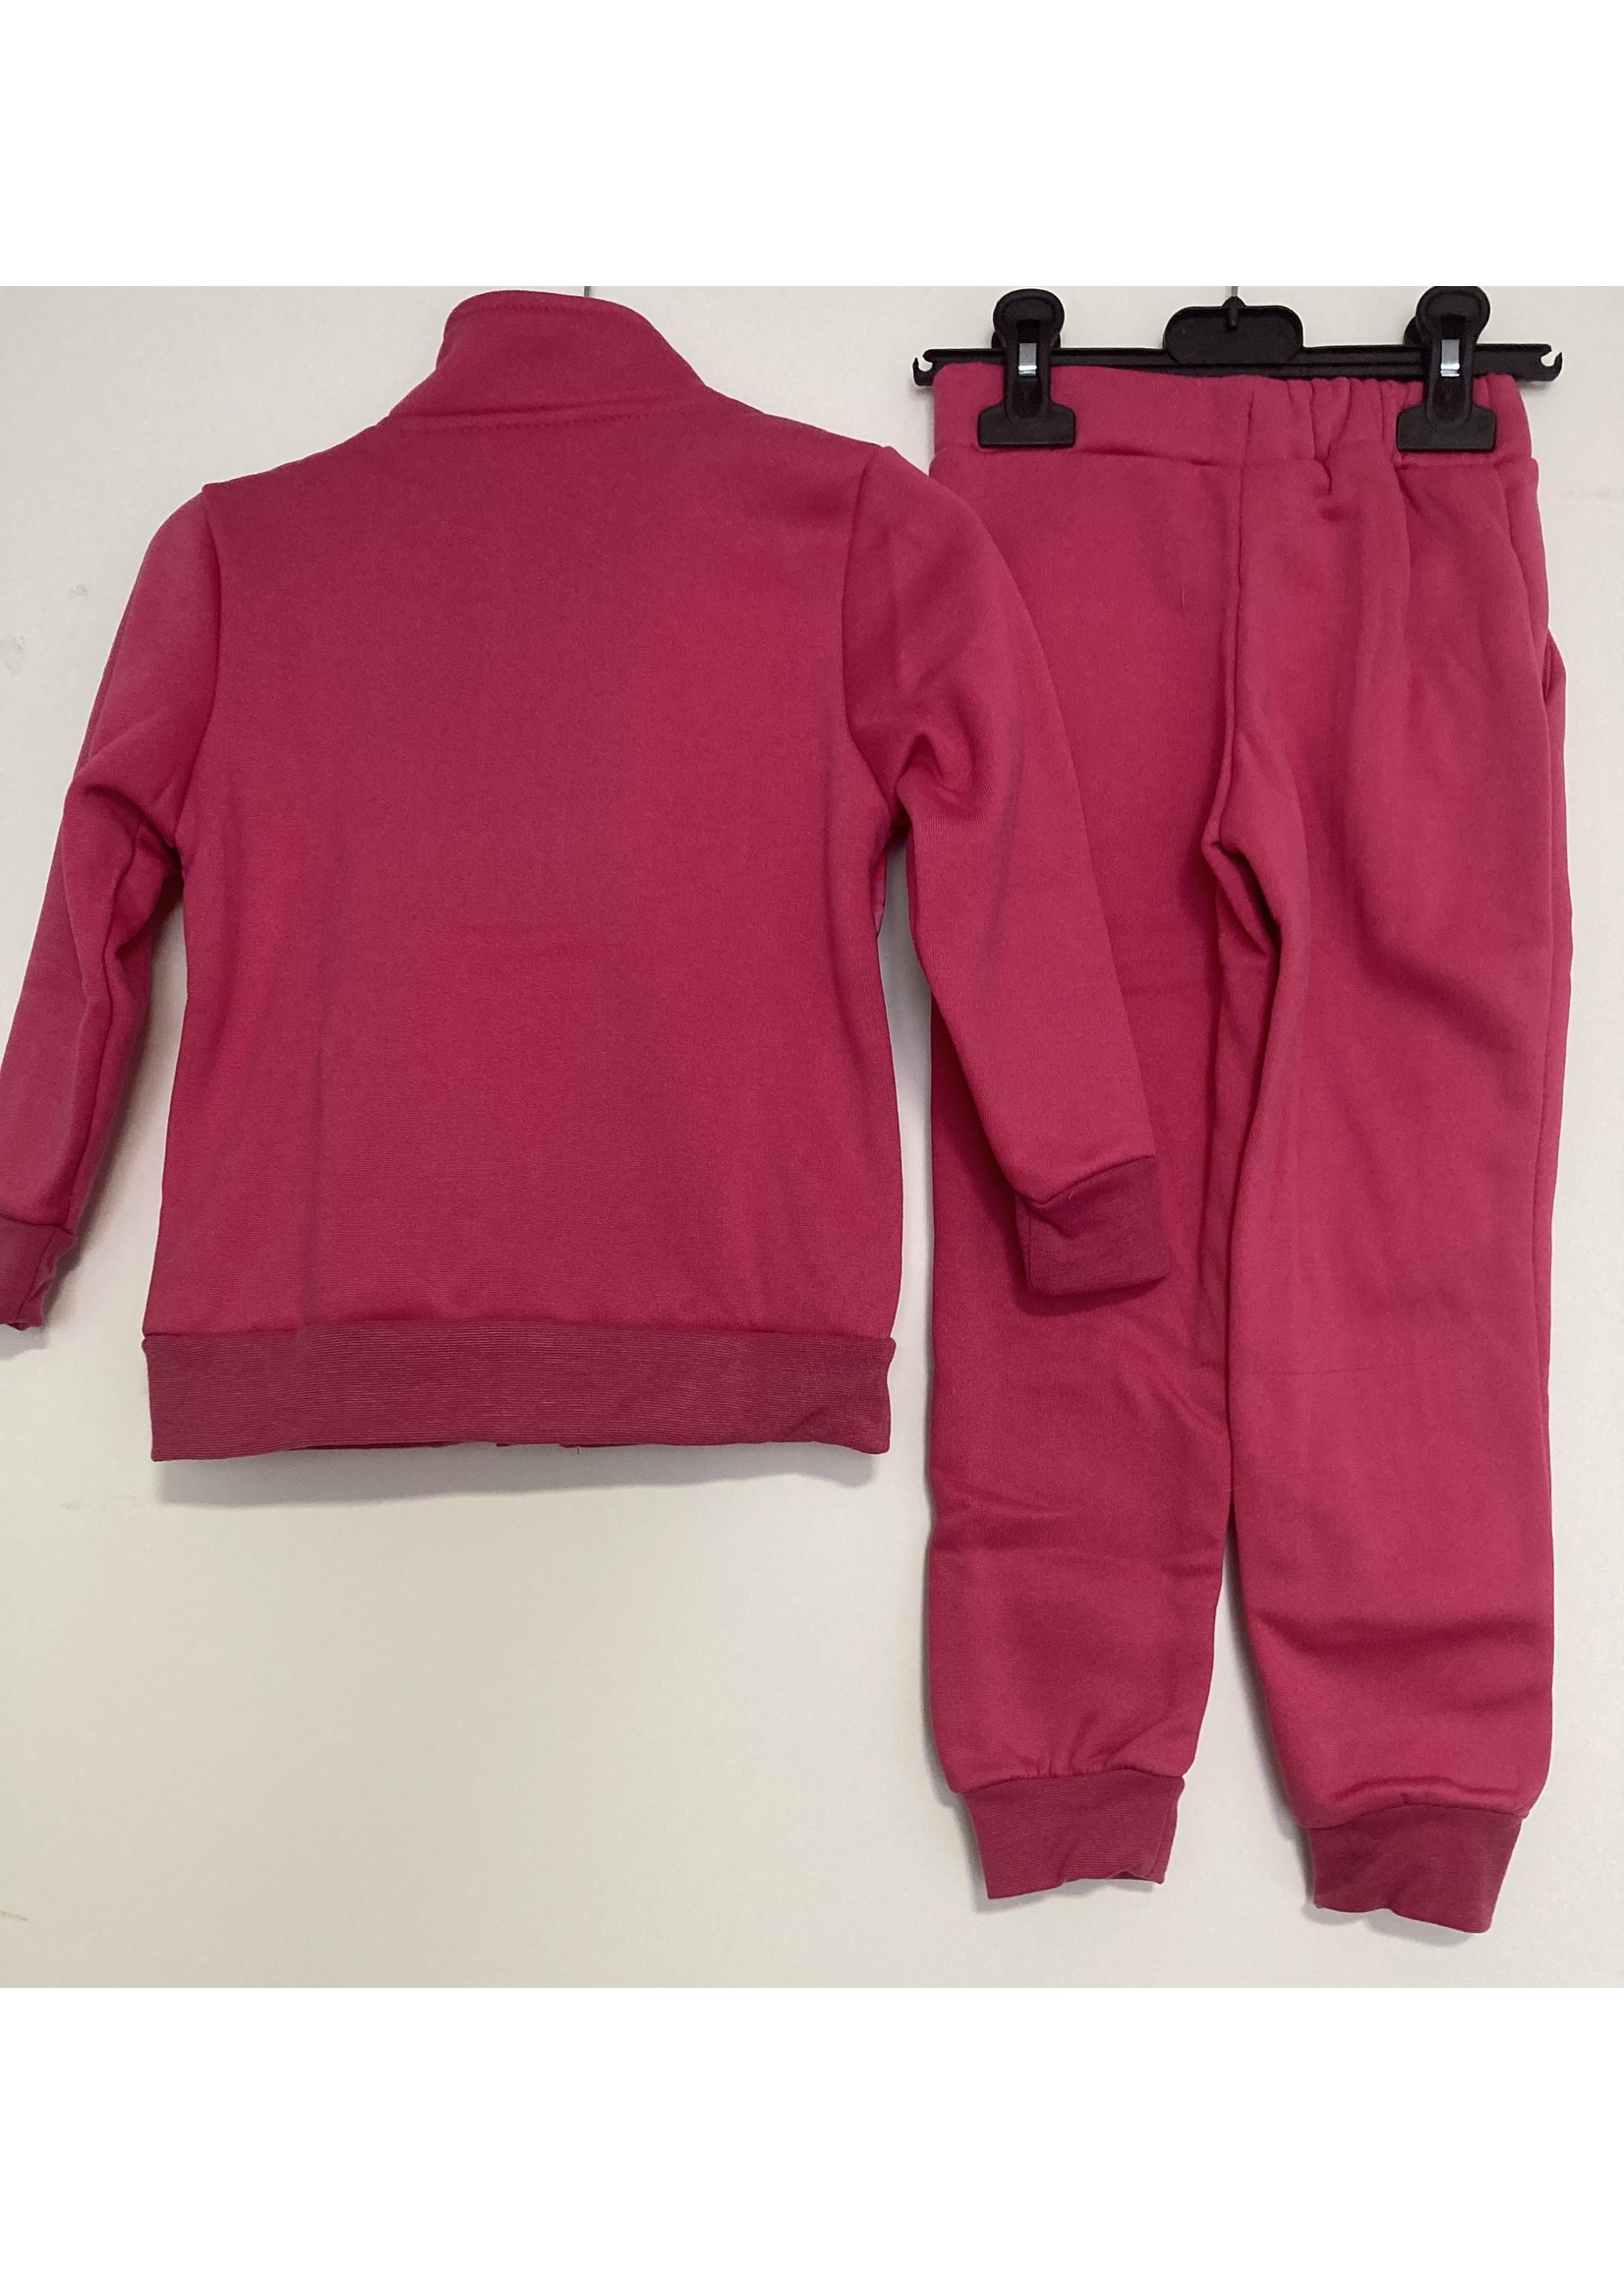 Miraculous Ladybug tracksuit from Miraculous pink